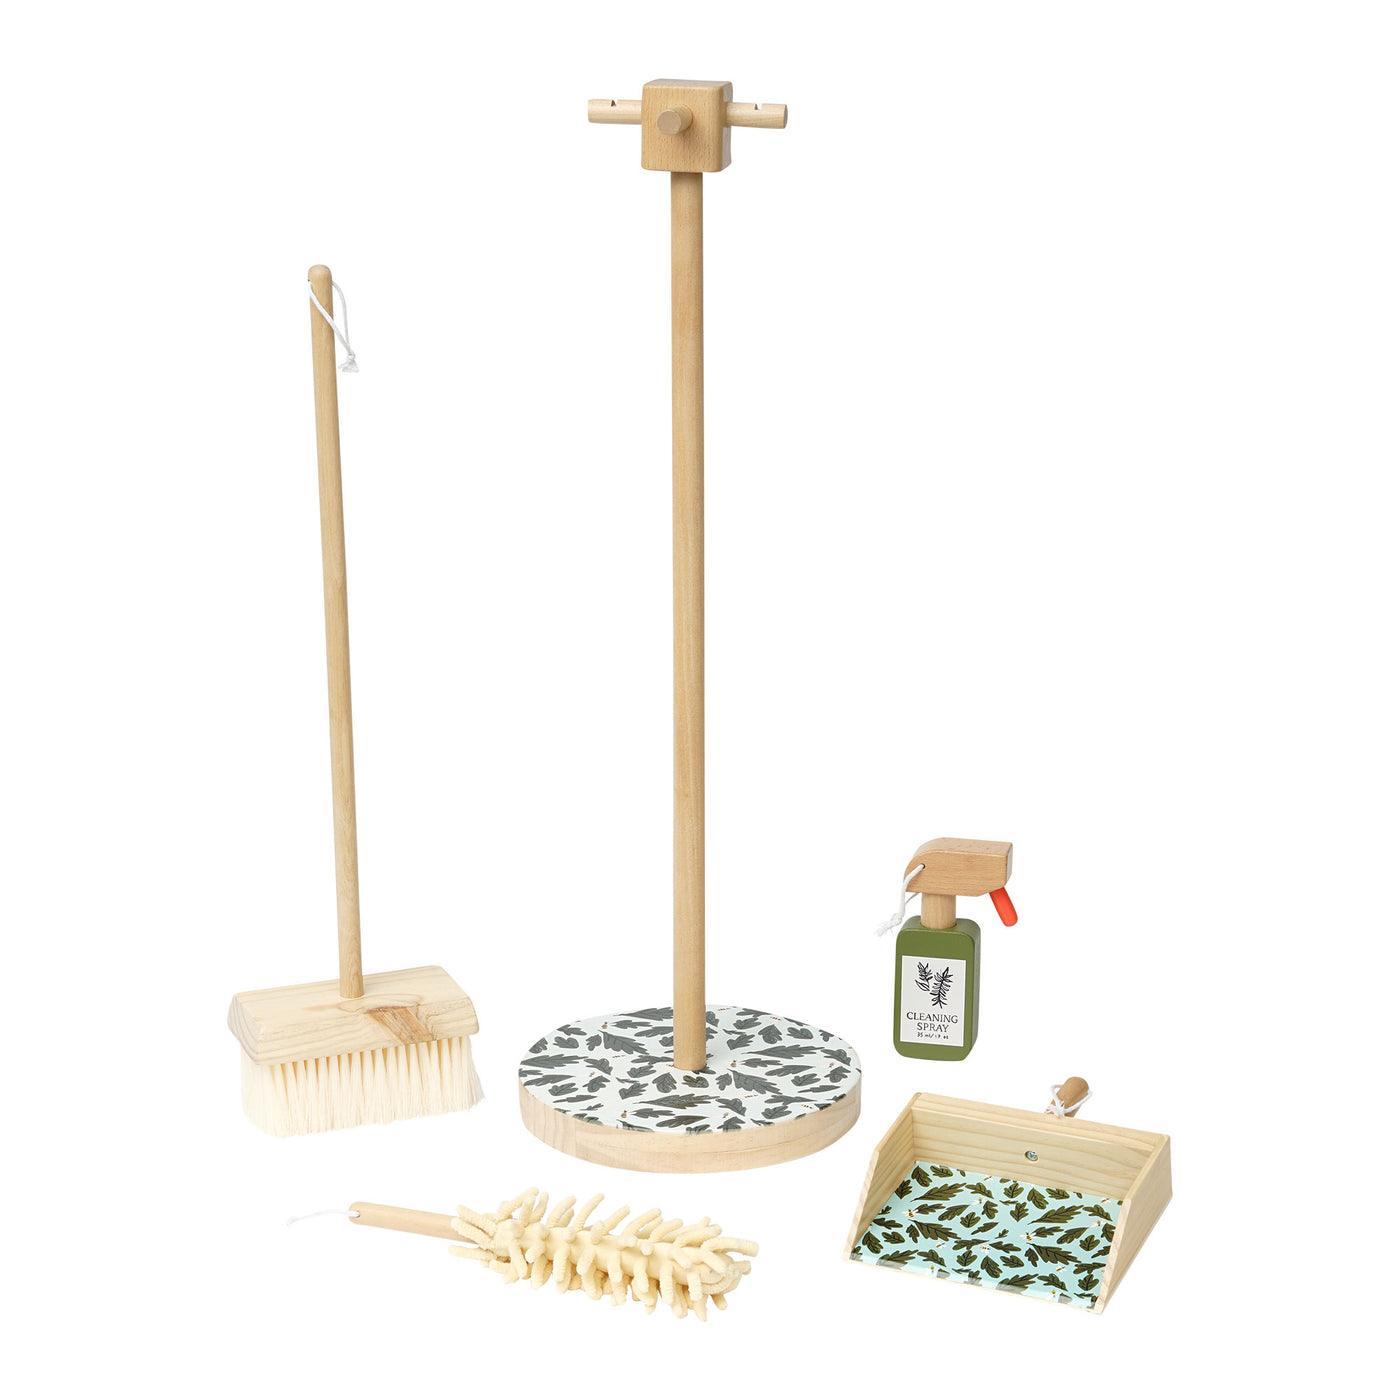 Spruce Cleaning Set - Why and Whale